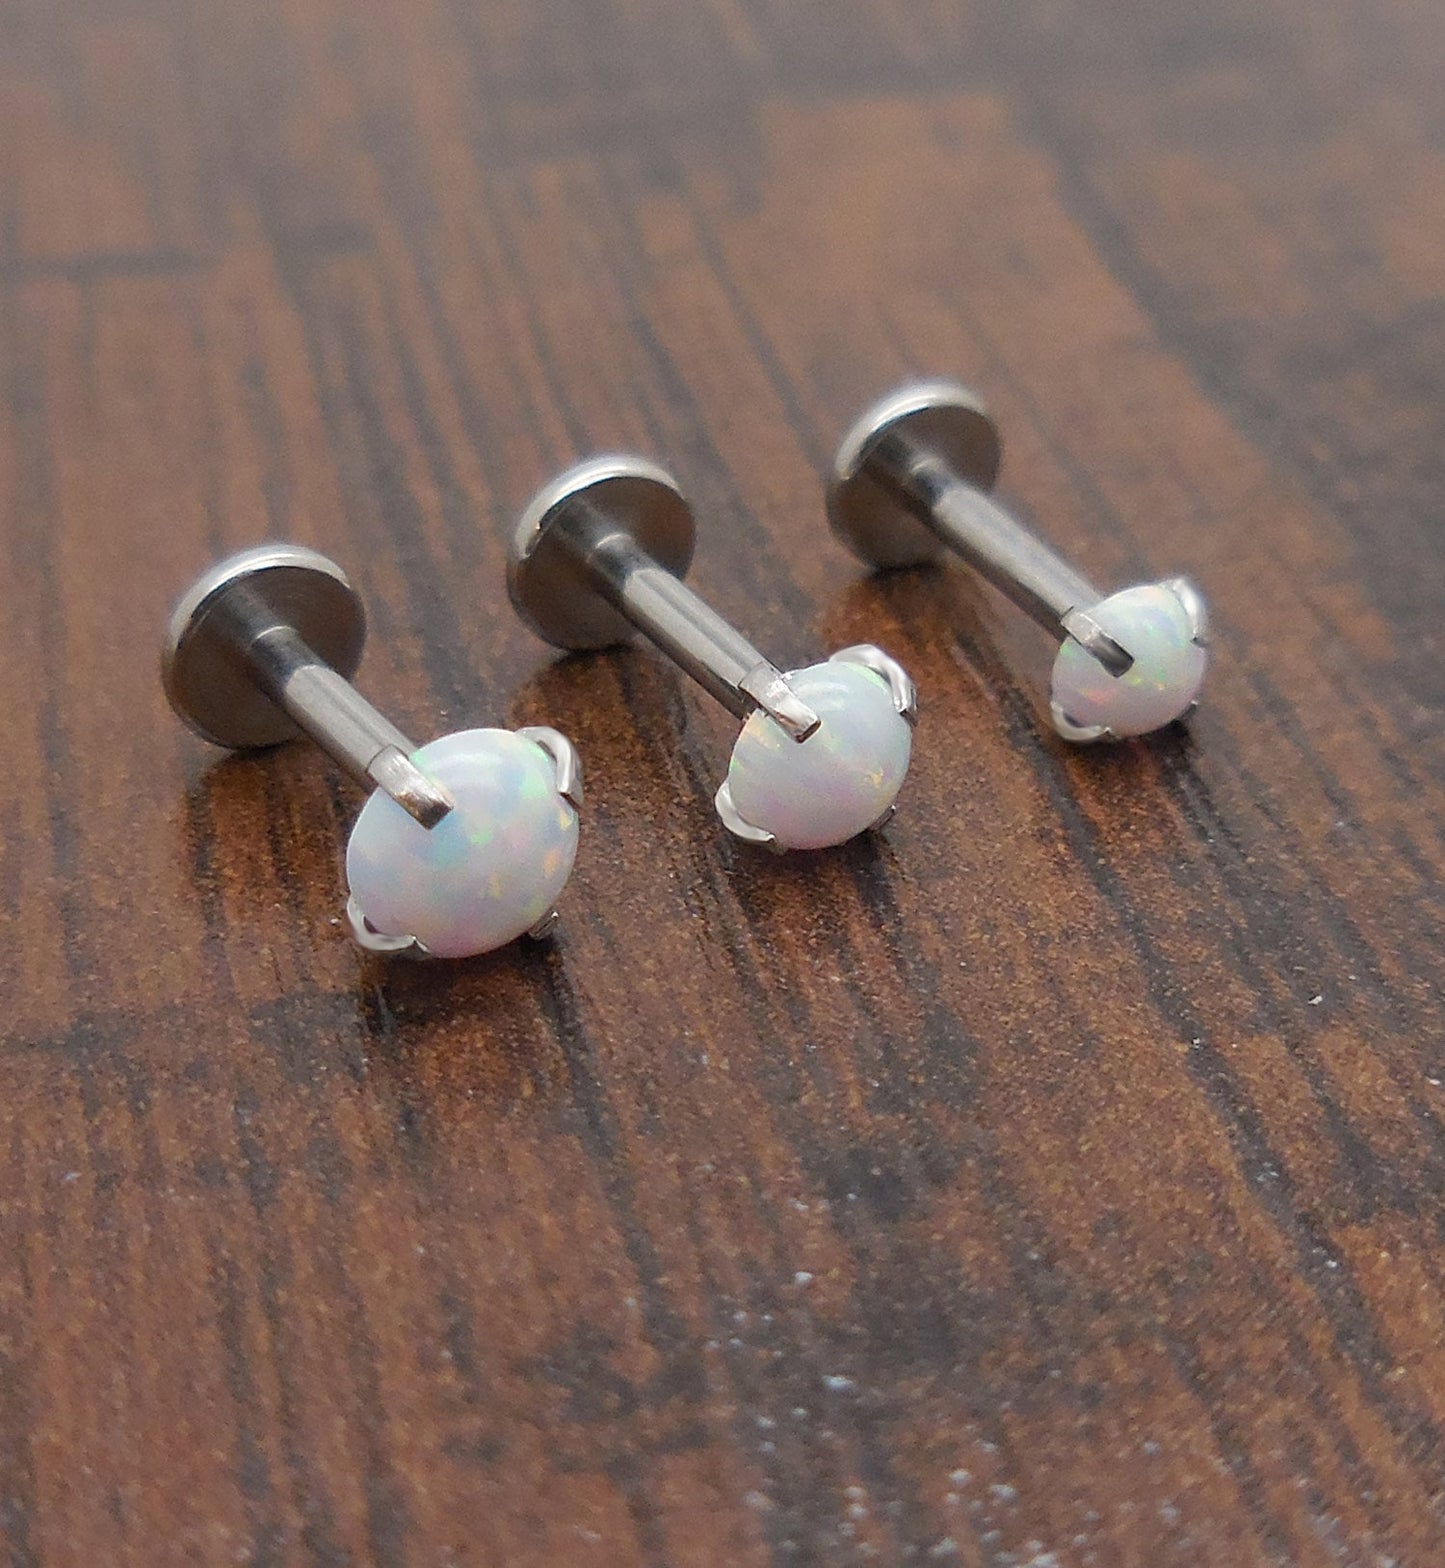 16g 2-4mm Tragus 6mm-8mm Threadless White Opal Push Pin Labret Triple Forward Helix Nose Ring Cartilage Earrings Stainless Prong Set